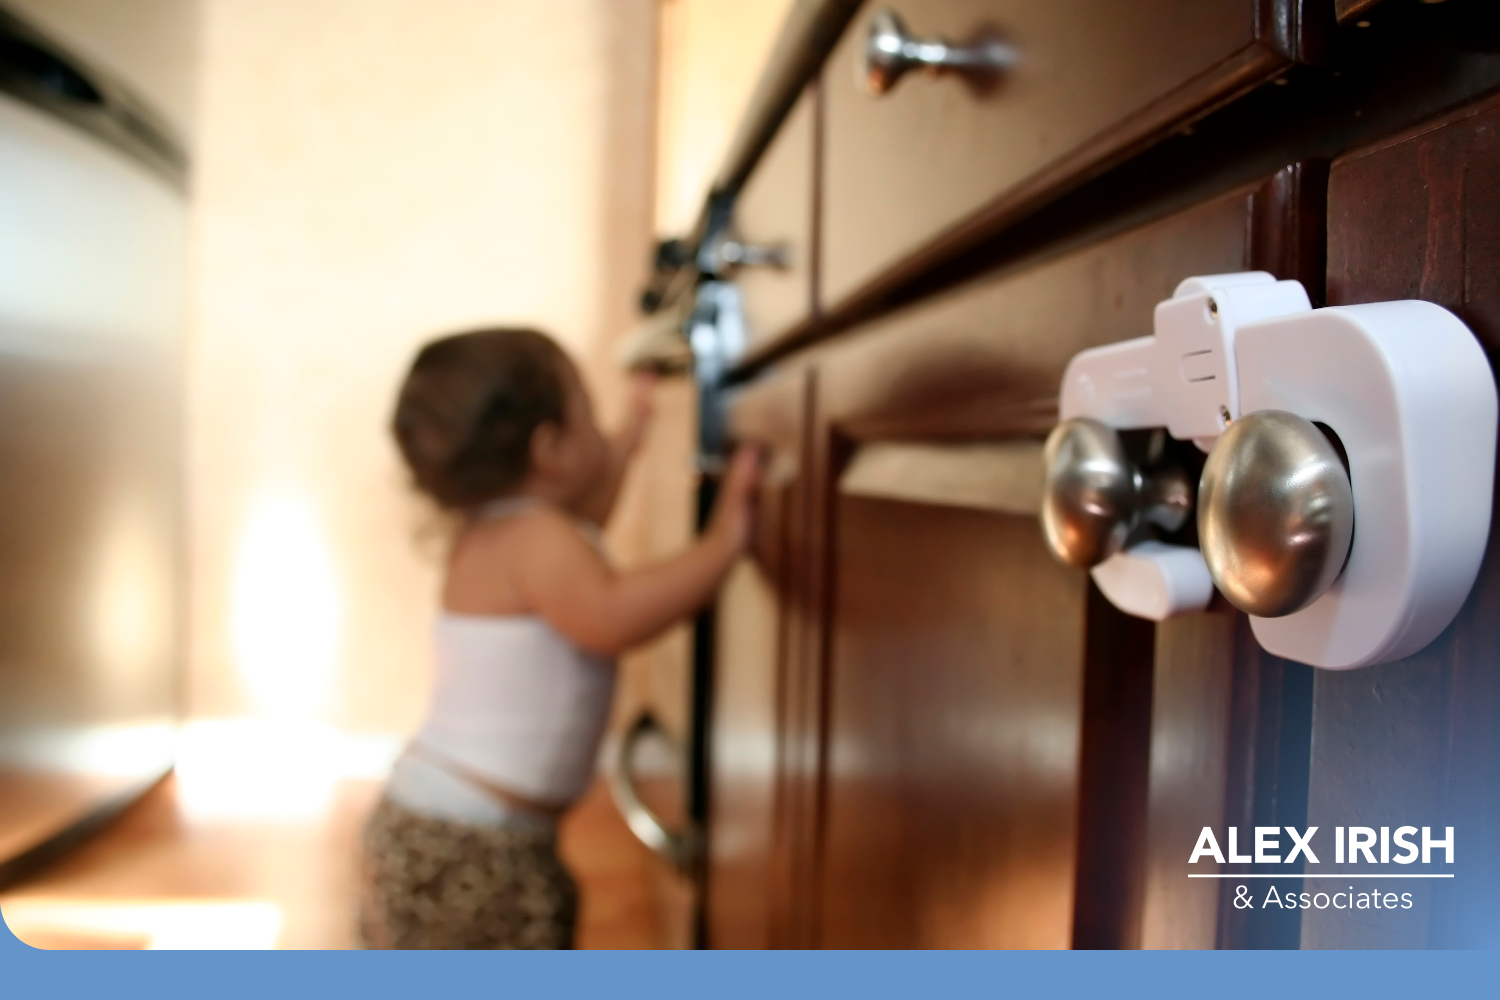 Childproof lock on the handle of two cabinets with a blurred child in the background